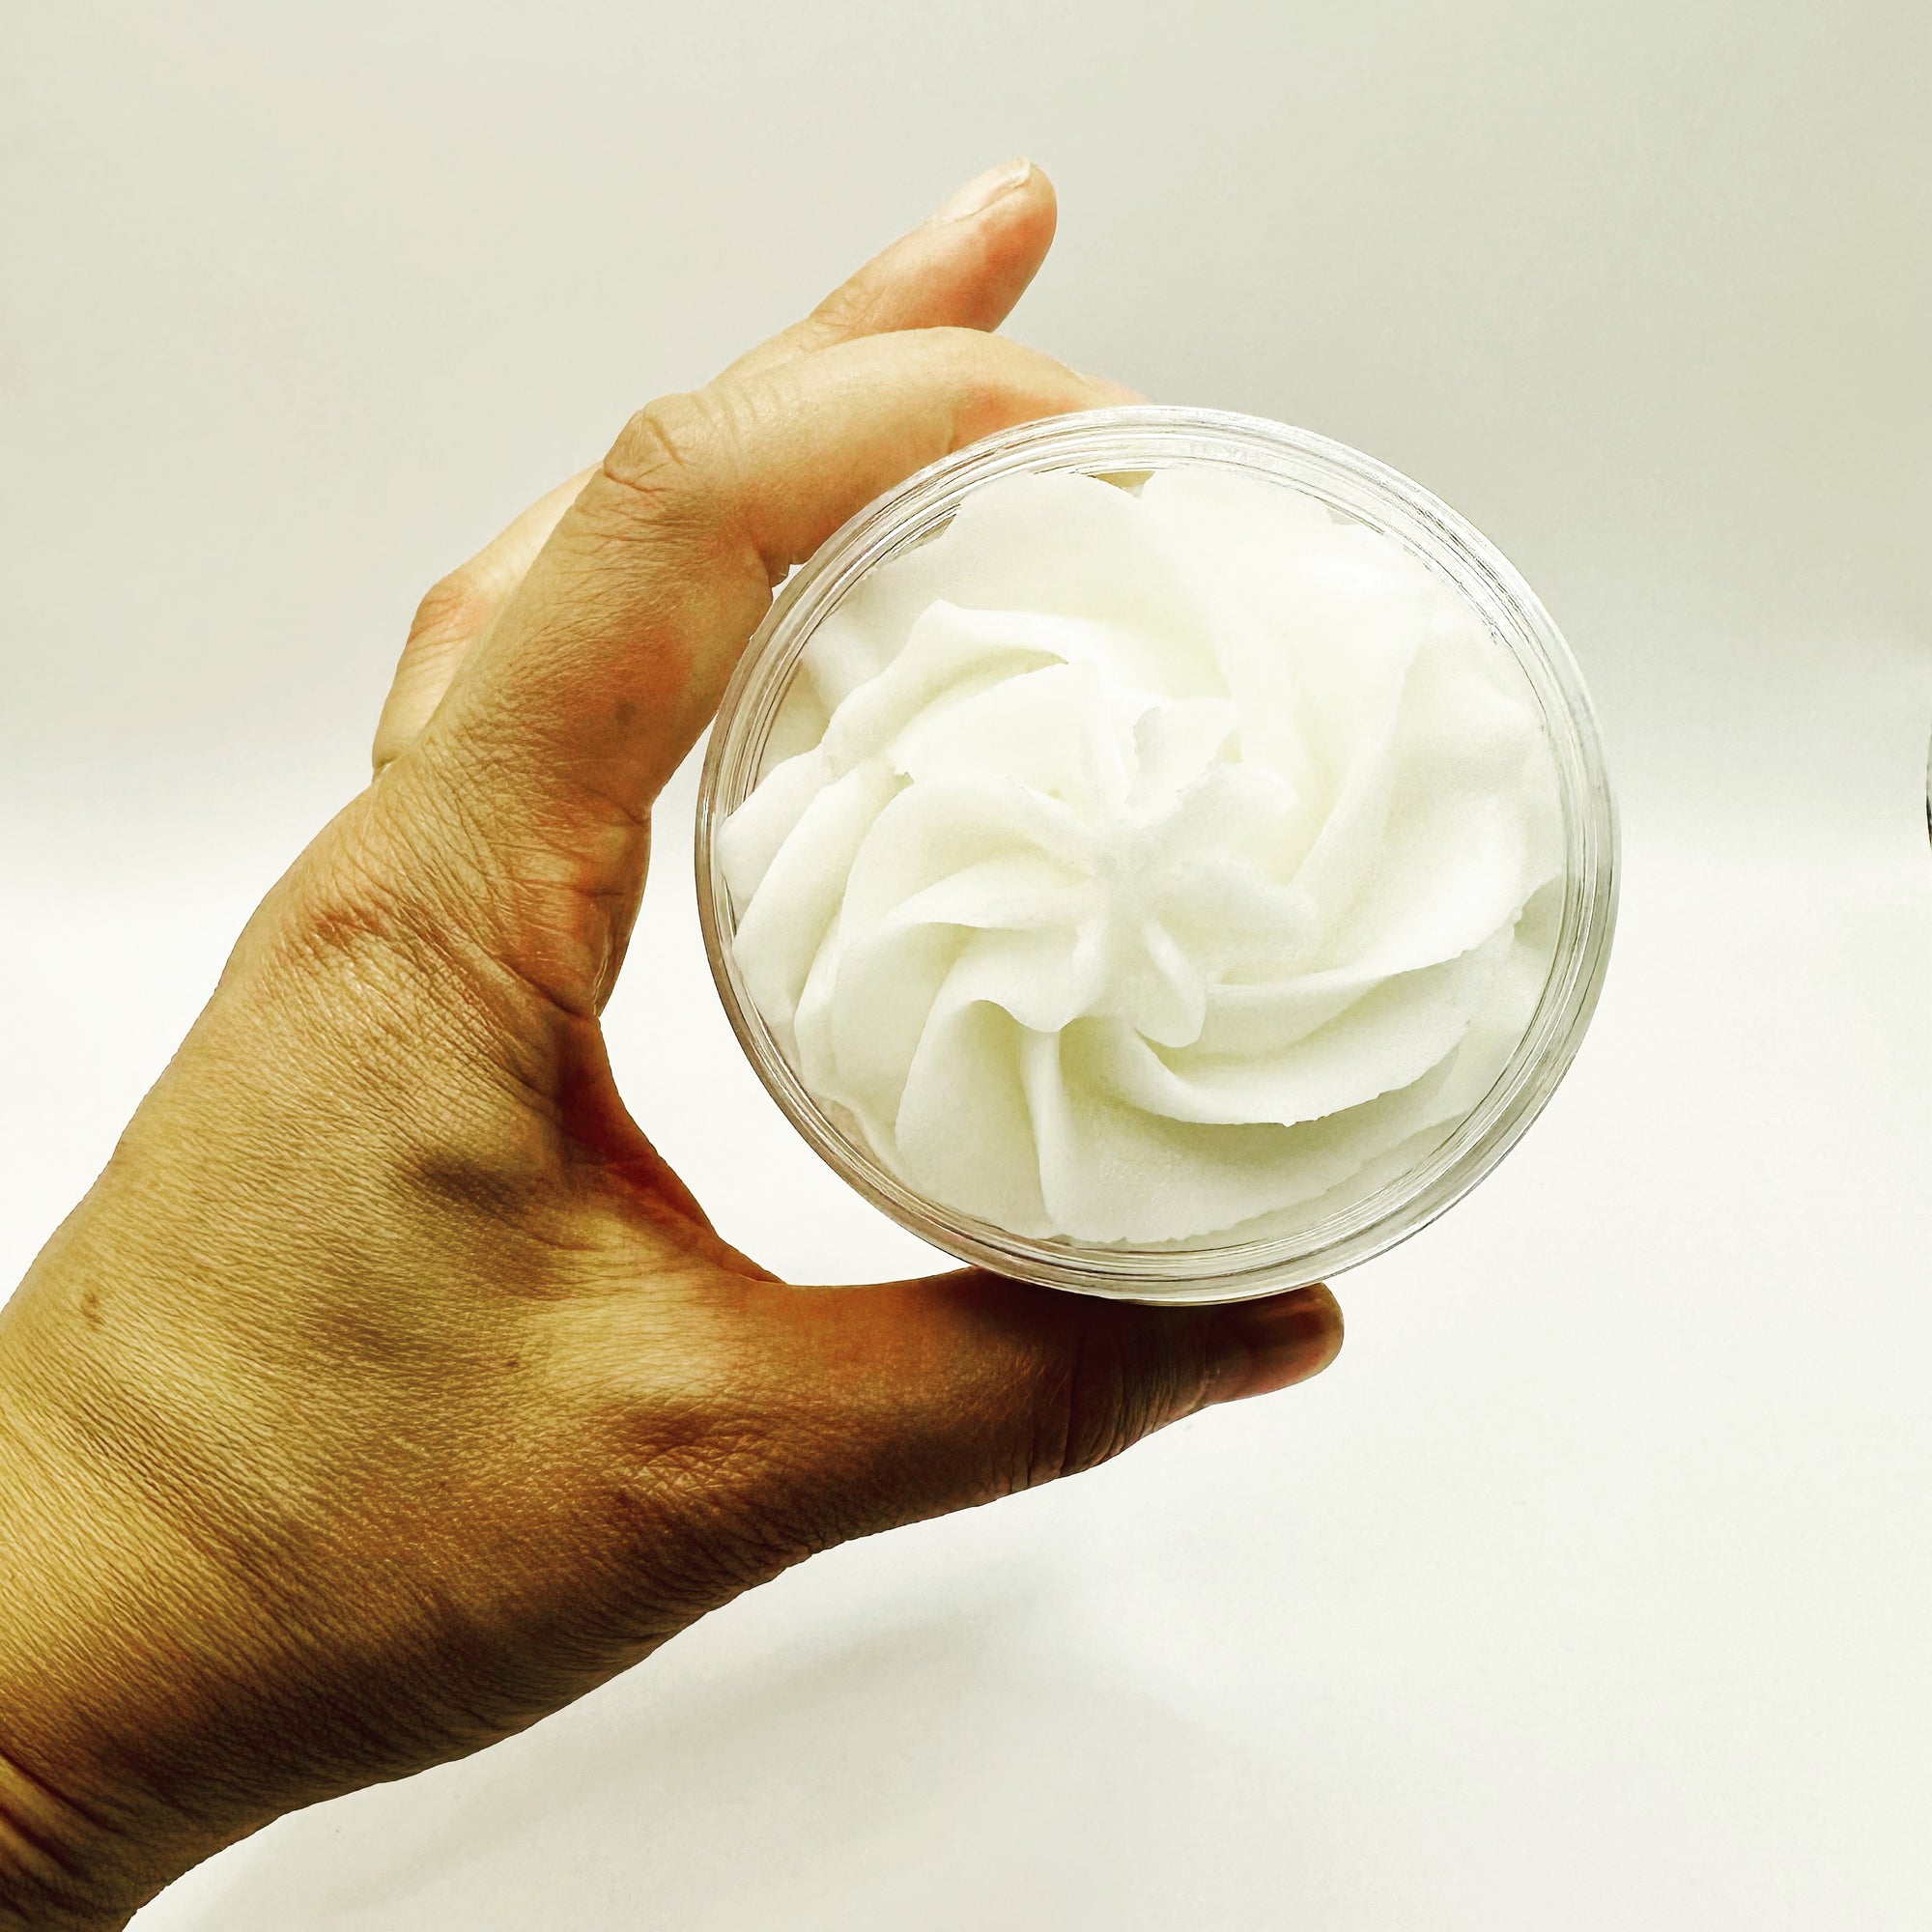 Whipped Coconut Cream Body Butter 4 oz